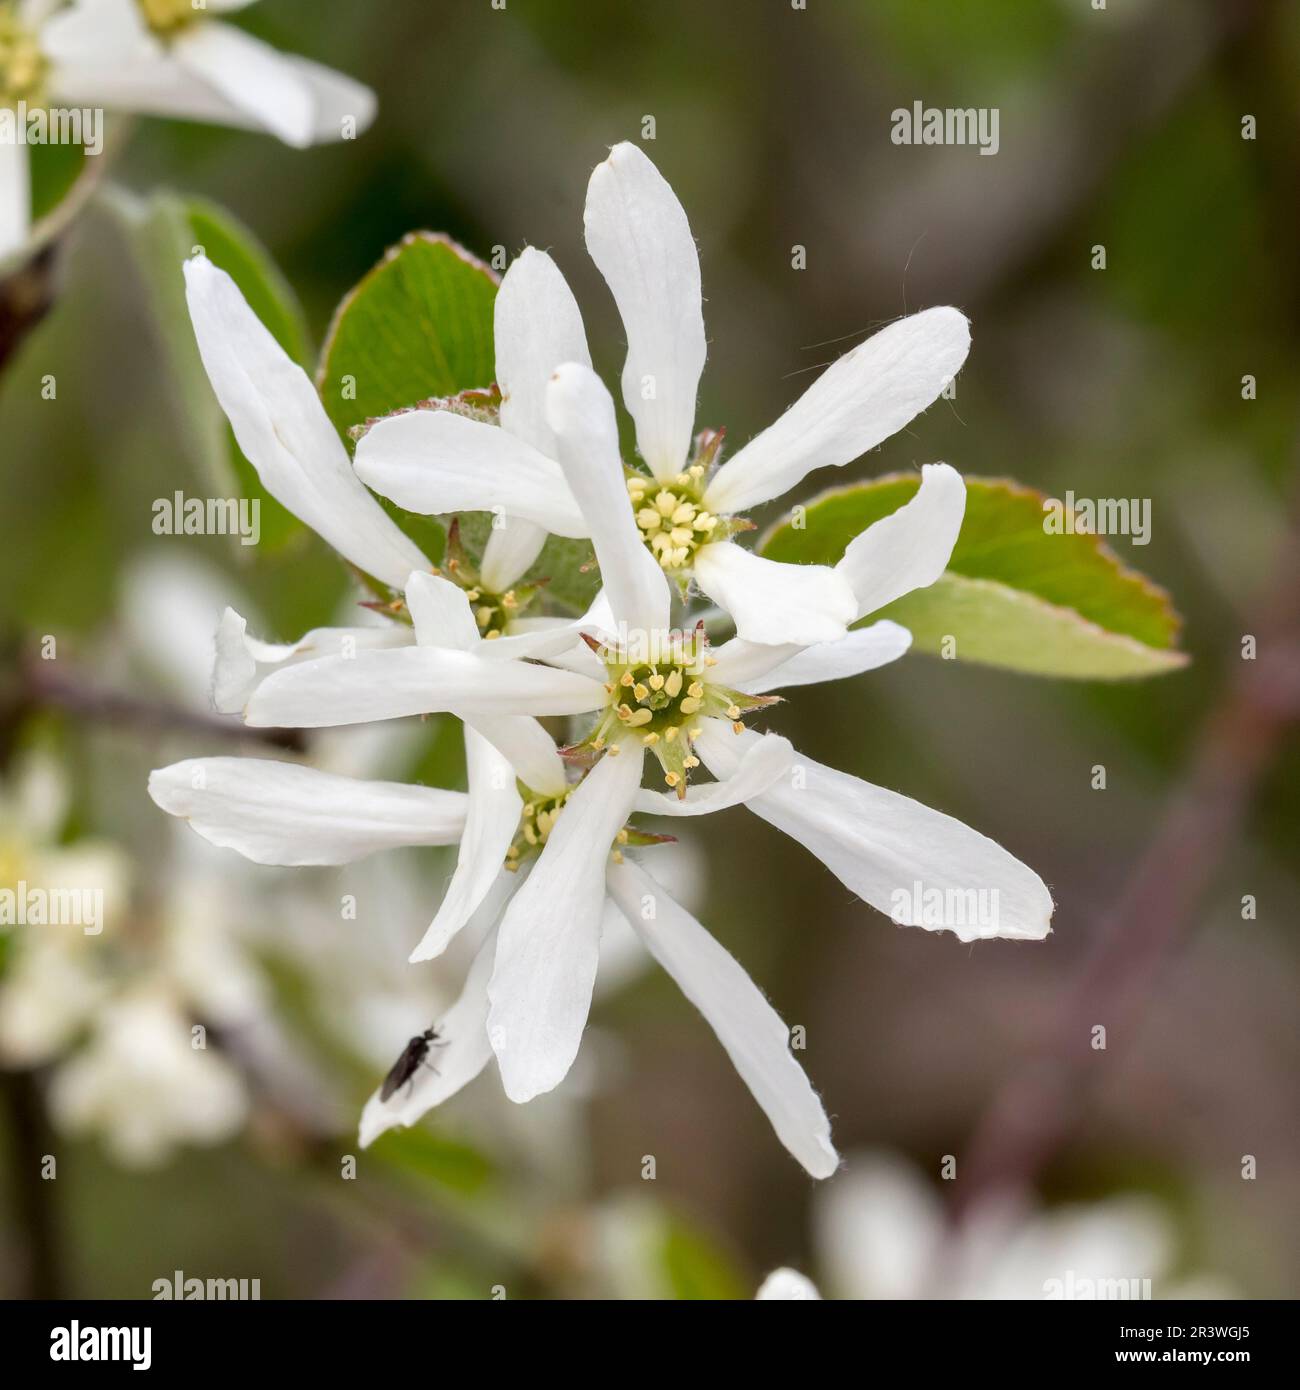 Amelanchier ovalis, common names are Snowy mespilus, Garden serviceberry and Grape pear Stock Photo